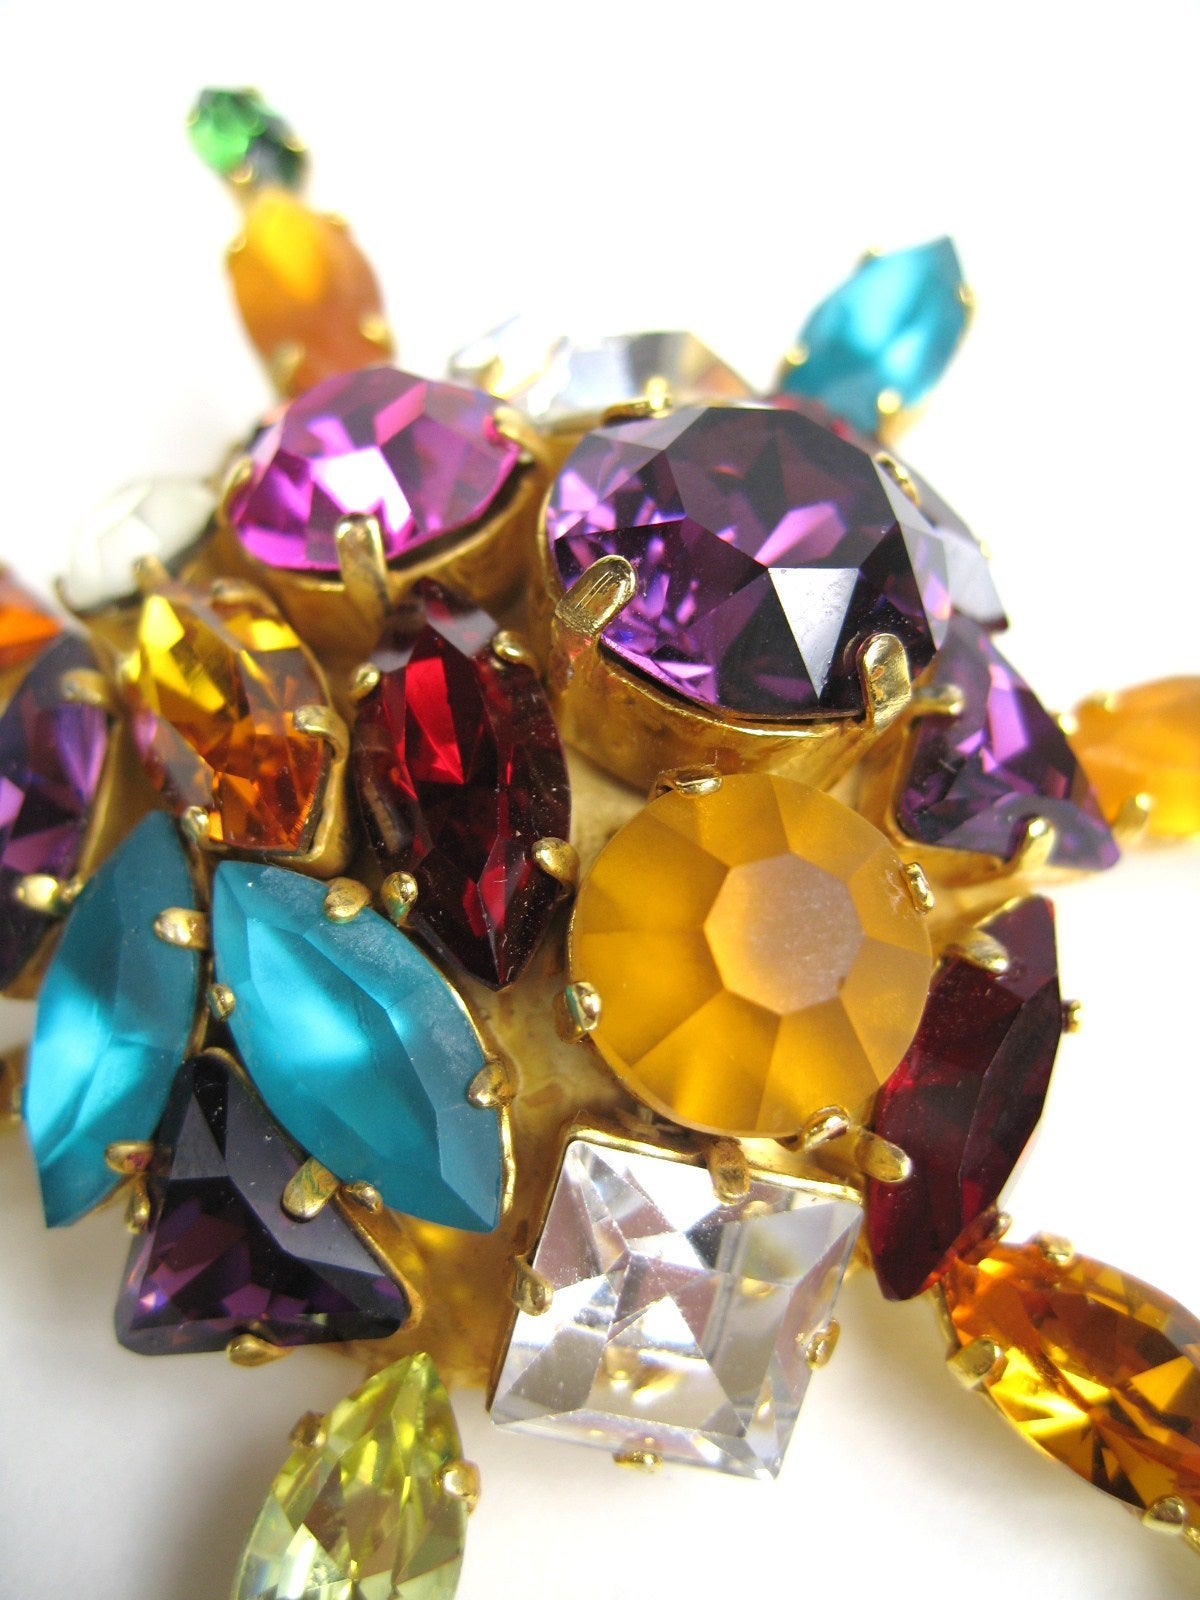 It an explosion of crystals from partisan artisan Dominique Aurientis. This pin is set in a gilt metal with crystals that have a host of colors, sizes and shapes. The earrings have marquise set crystals in various bold colors. Pin measures 3.75